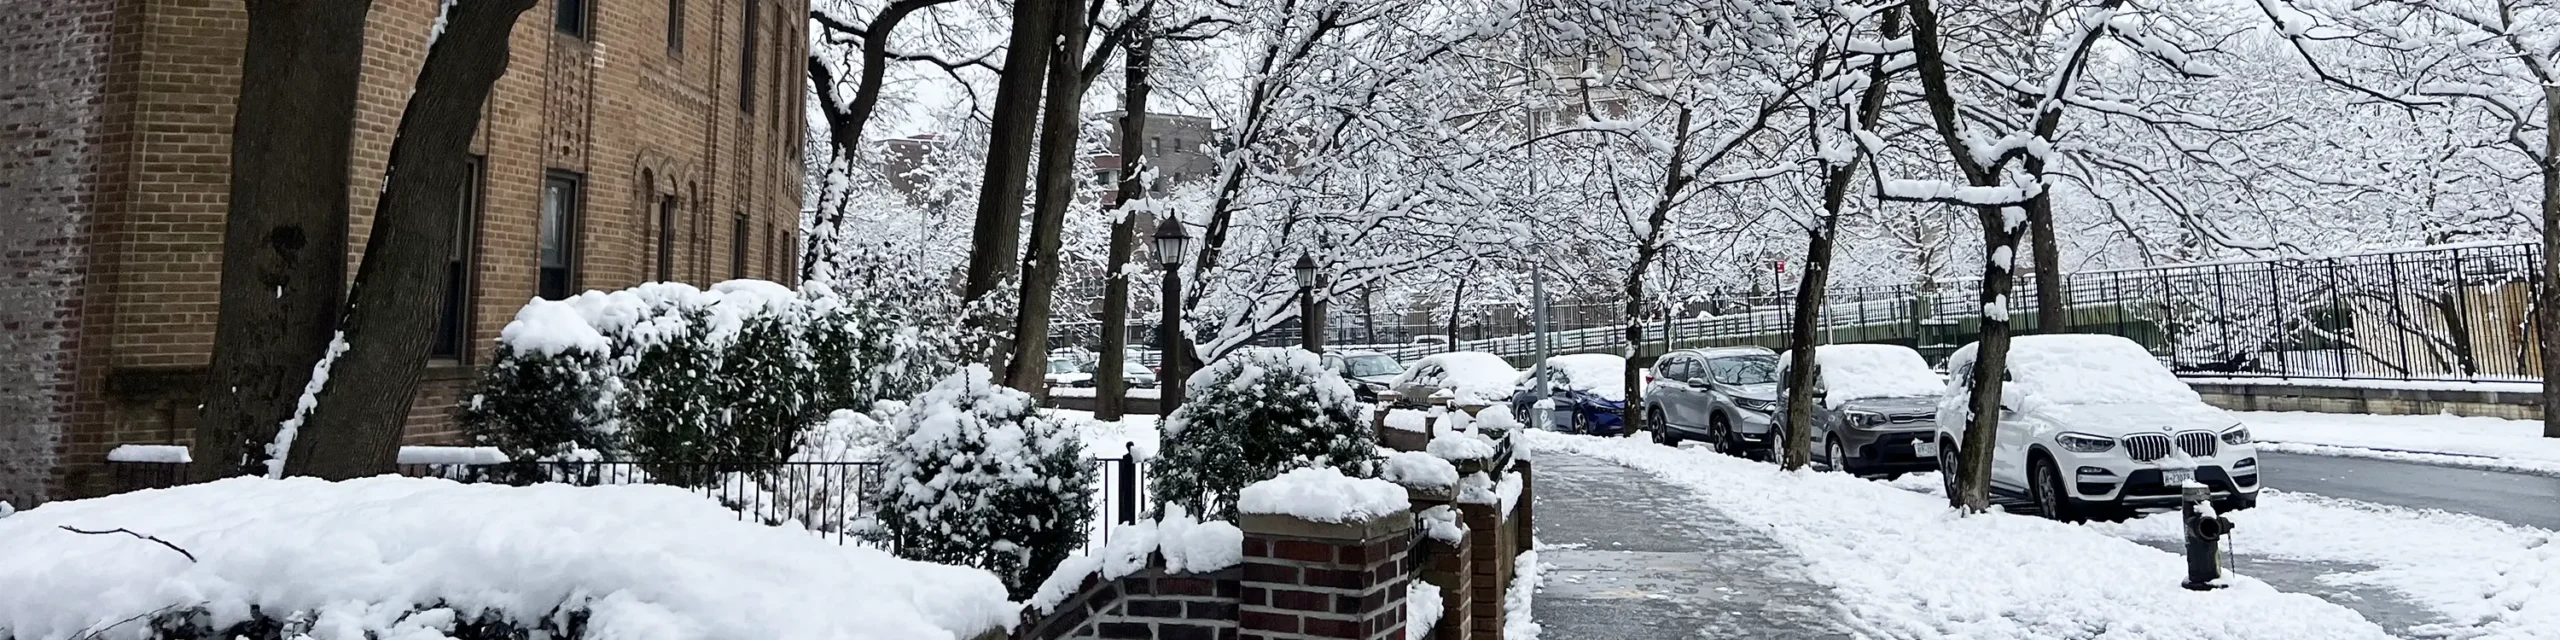 Snow-covered street in Brooklyn